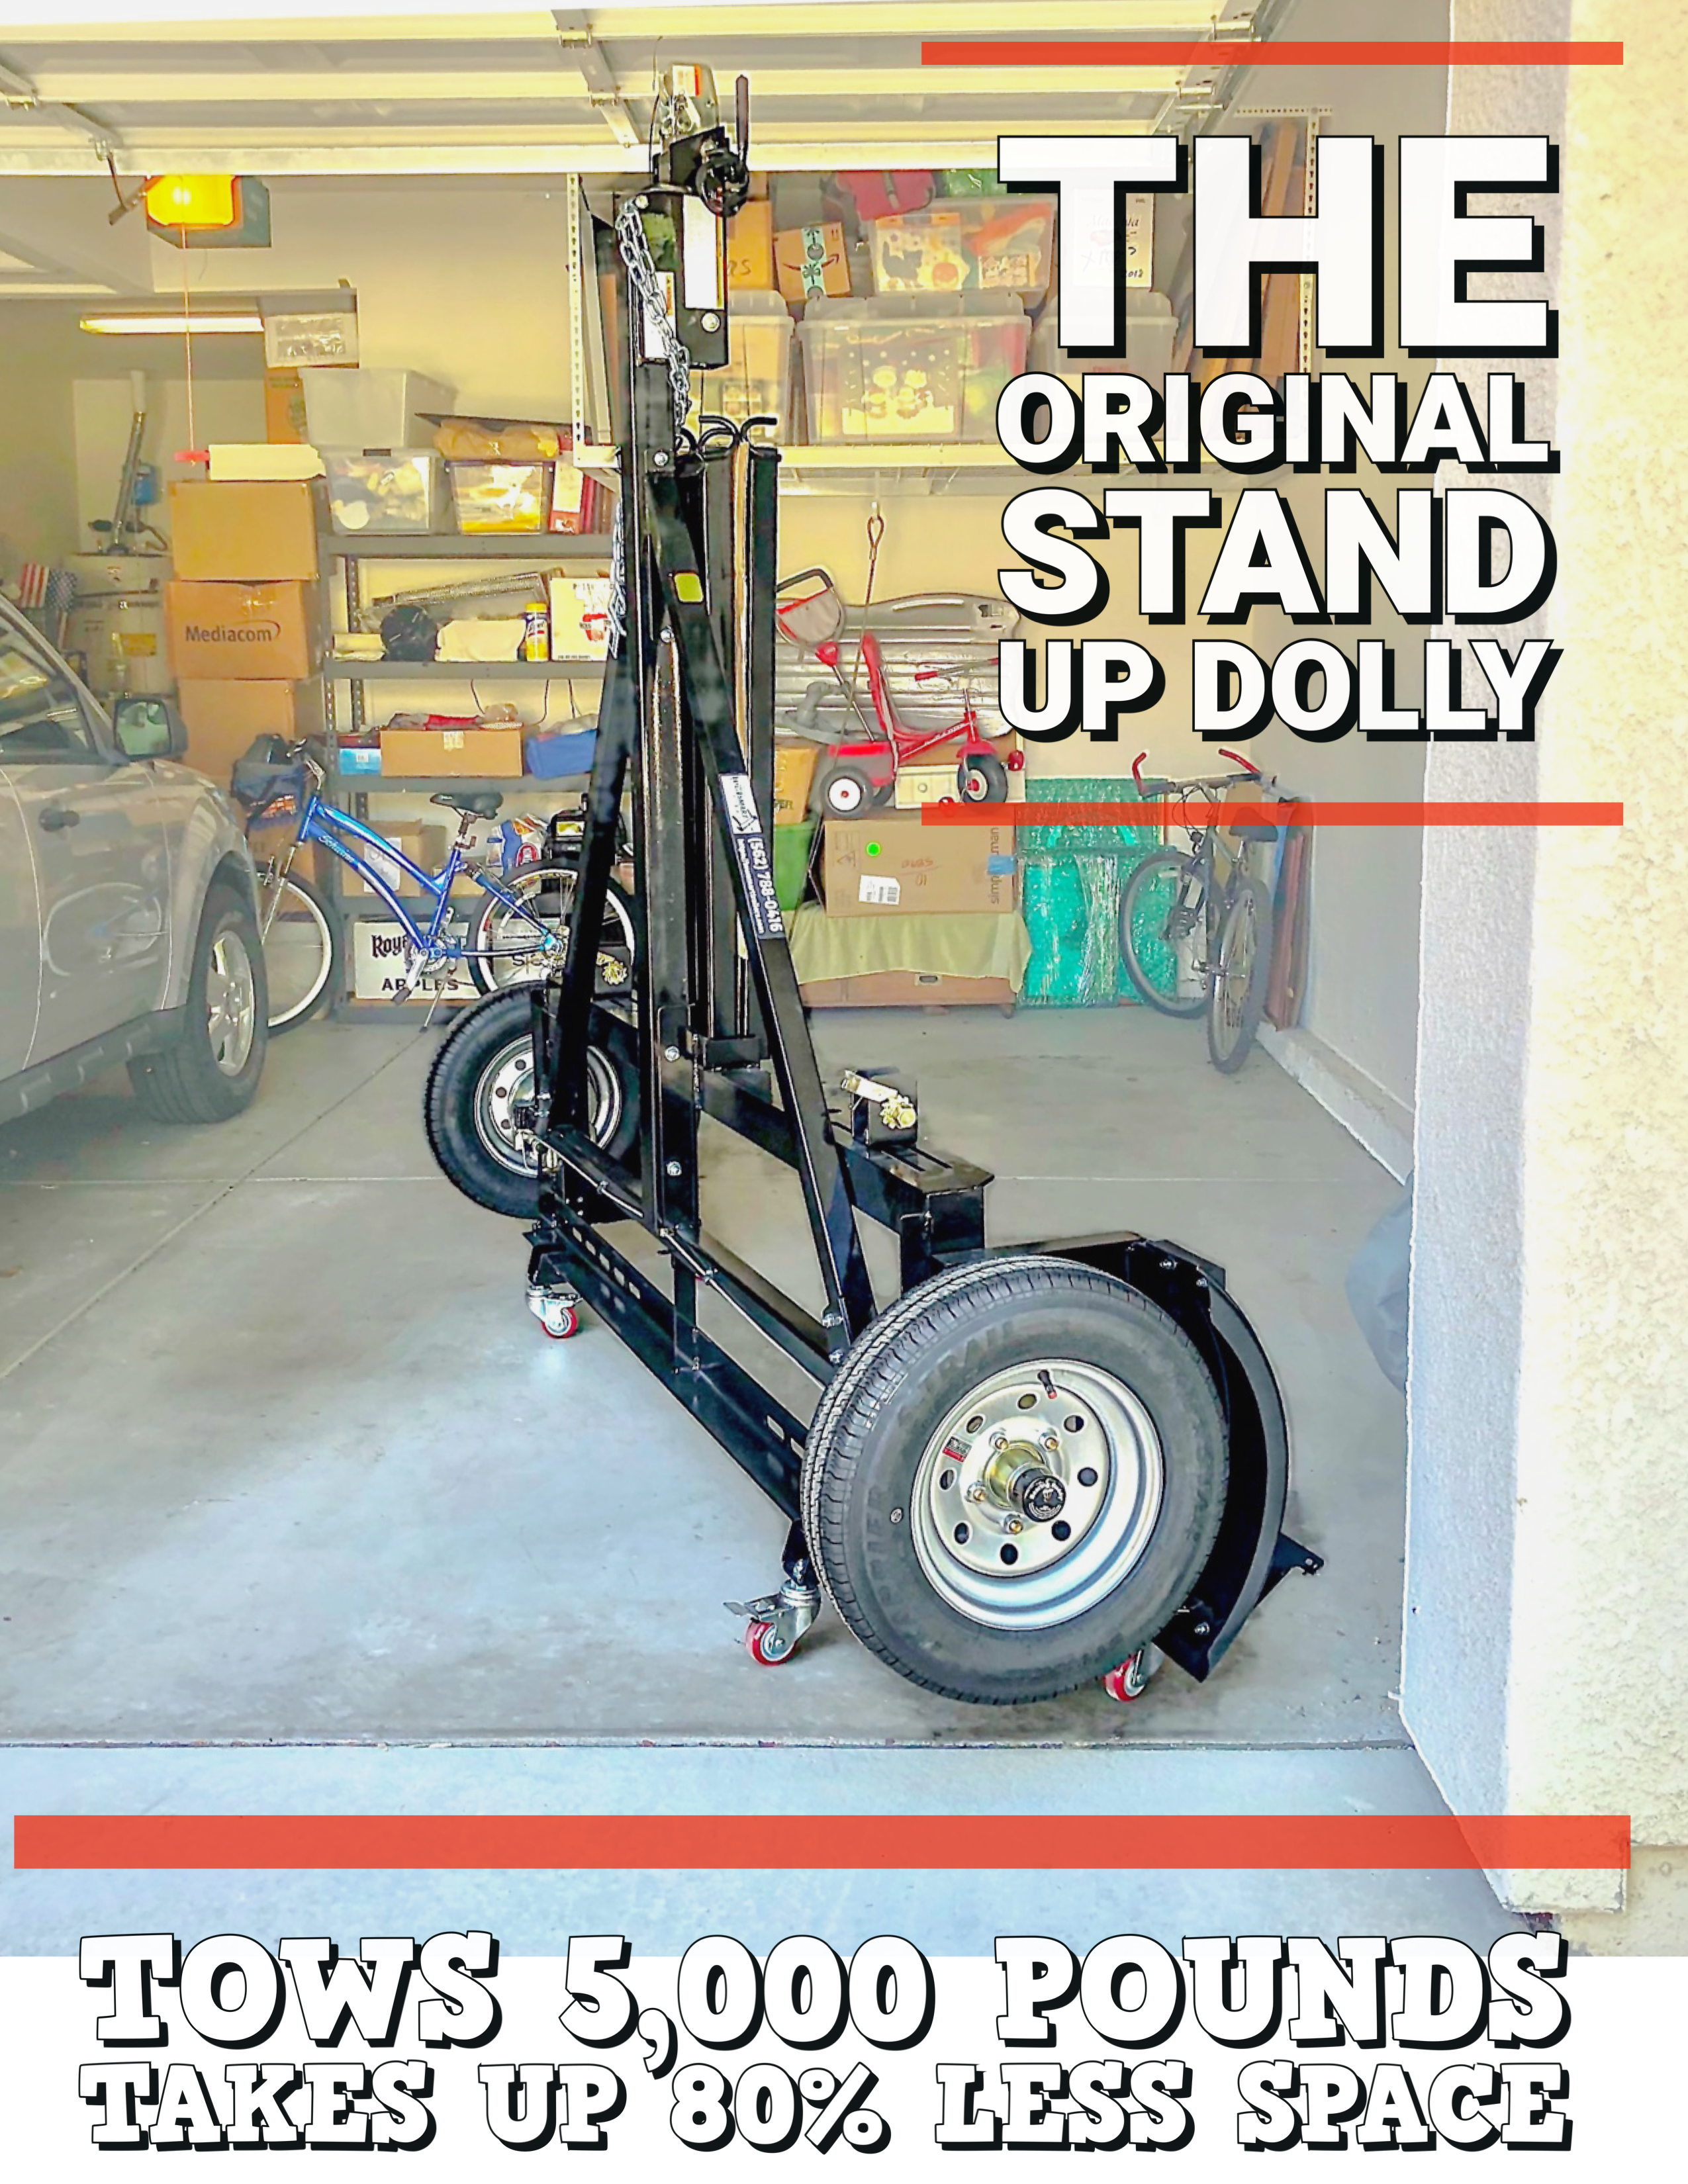 "This American-made stand-up car dolly features a heavy-duty steel frame with a weight capacity of up to 5000 pounds, making it a reliable choice for moving and storing vehicles of various sizes."